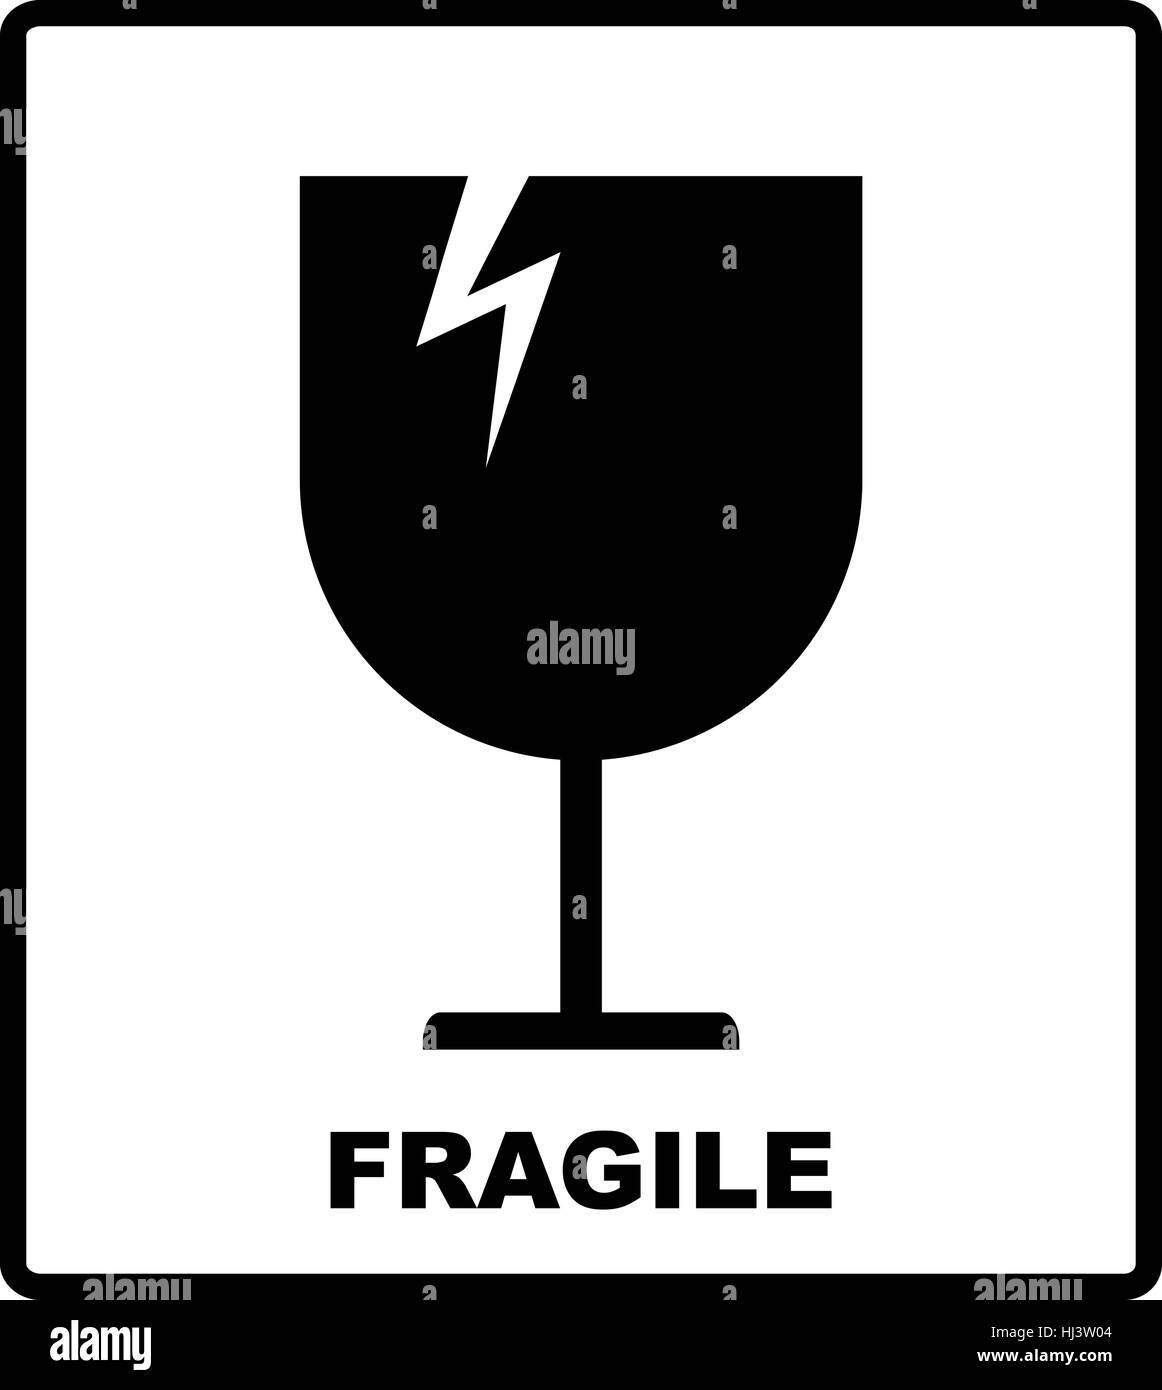 Breakable or fragile material packaging symbol. Vector illustration, black simple flat silhouettes of glass isolated on white Stock Vector